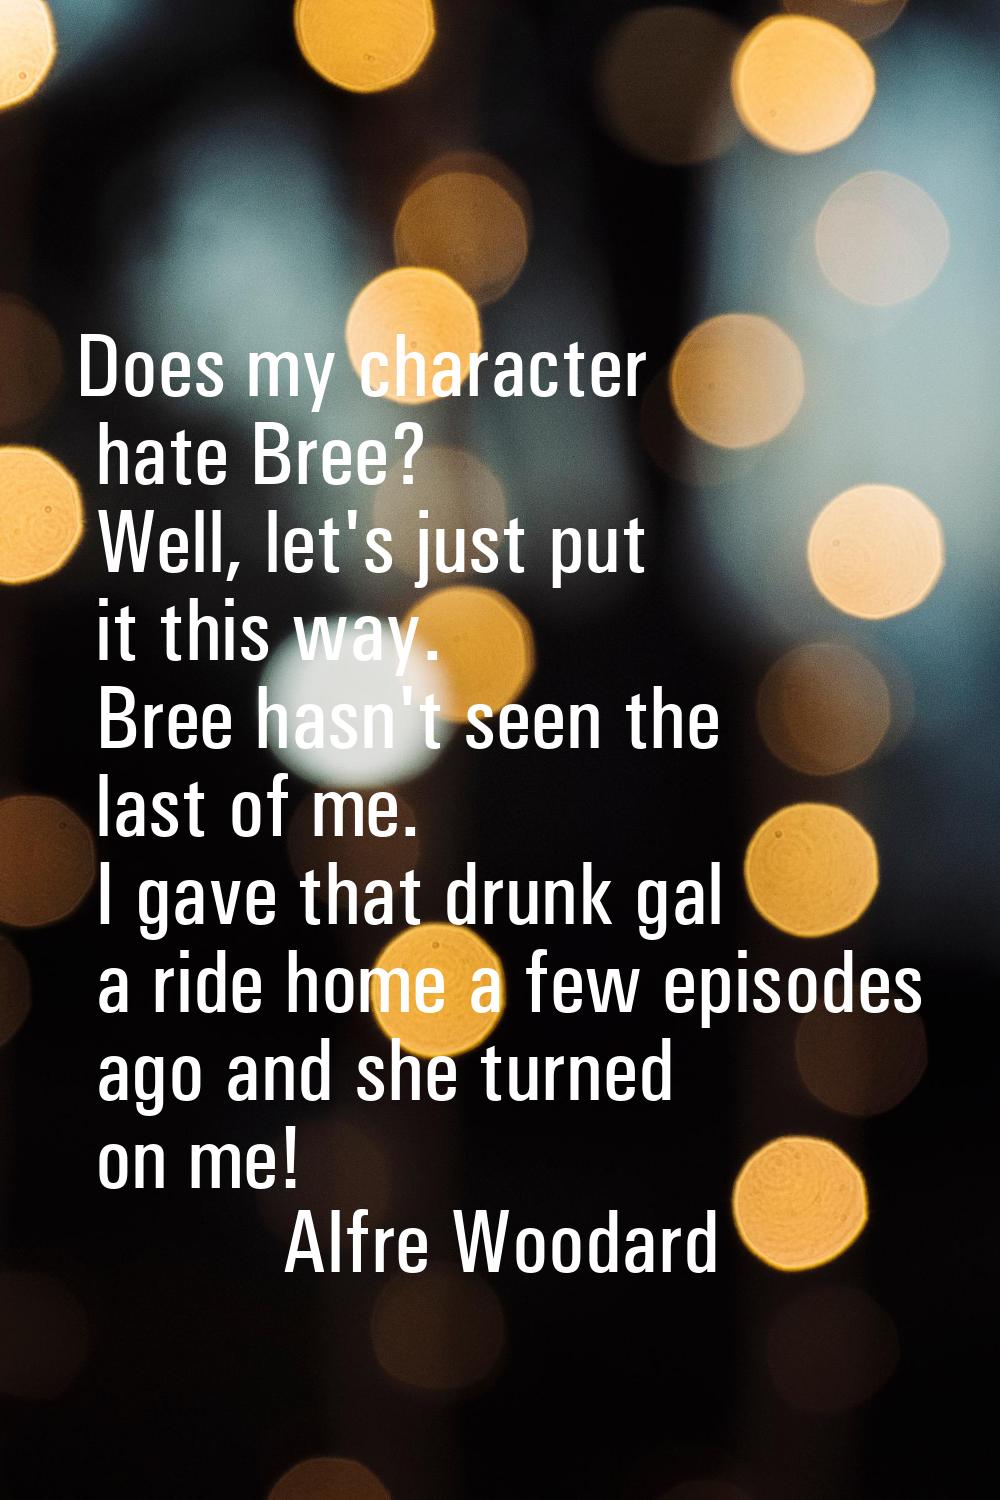 Does my character hate Bree? Well, let's just put it this way. Bree hasn't seen the last of me. I g